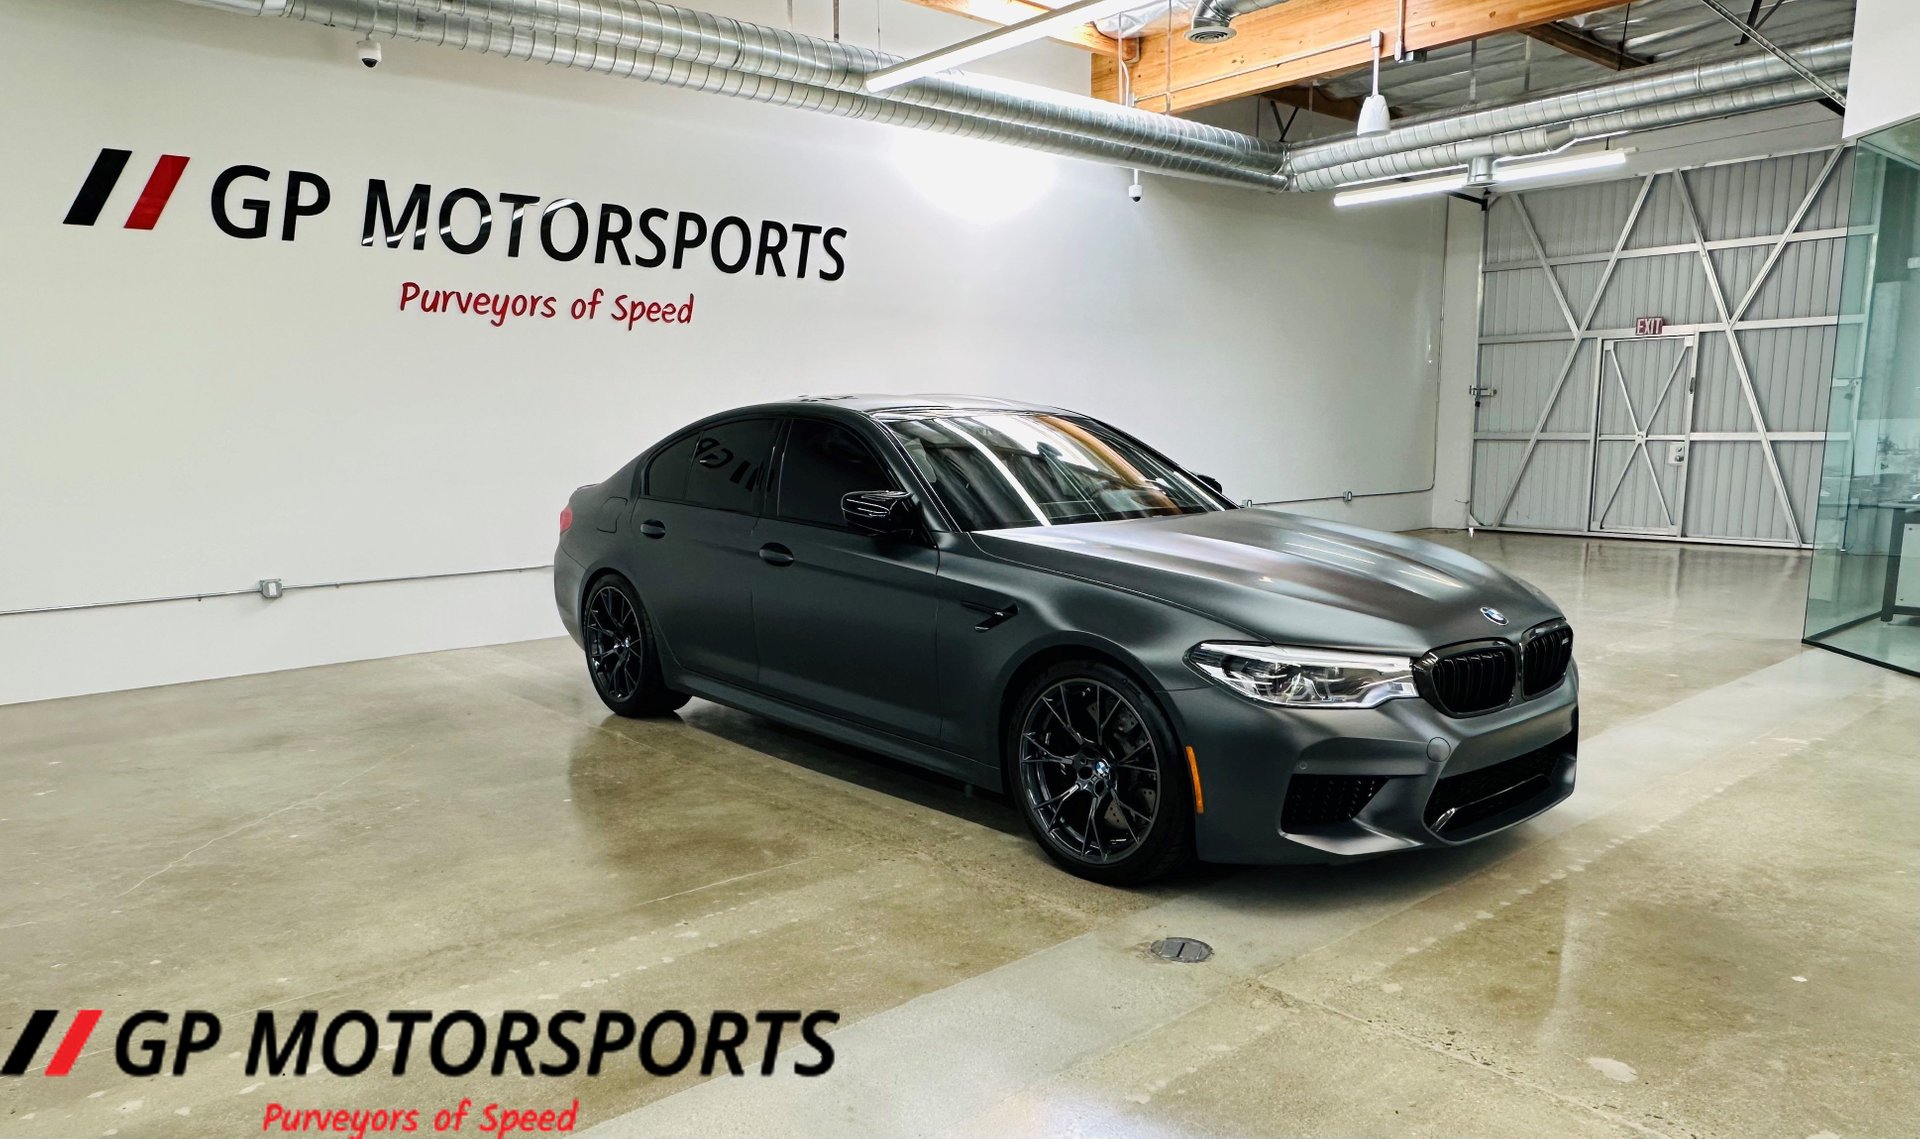 The 2020 BMW M5 Edition 35 Years.